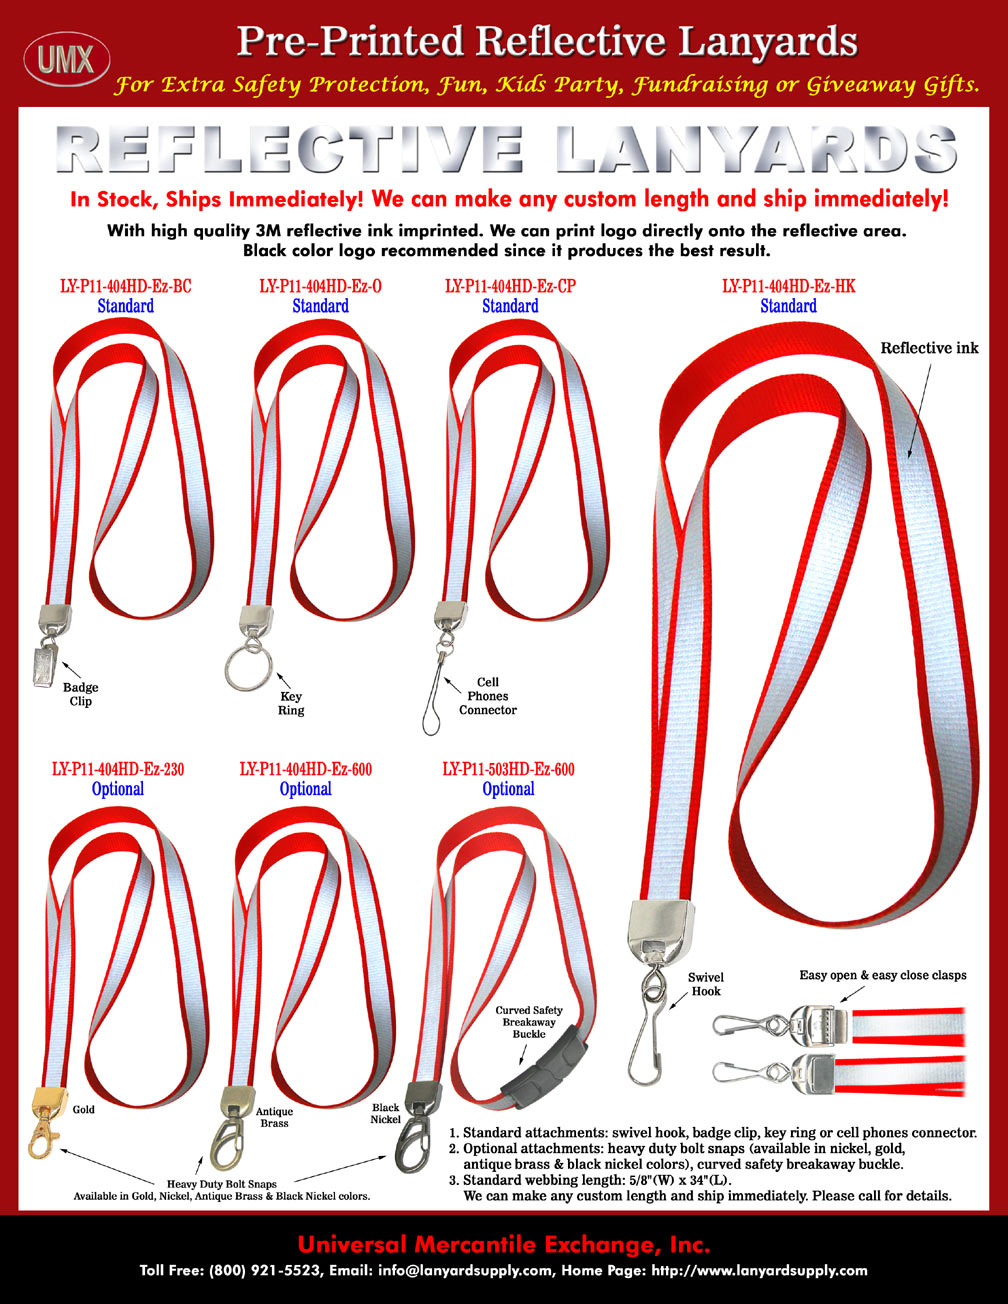 Reflective Lanyards: Cool Reflective Print Lanyards, Reflective Stripes or Patterns Printed Lanyards. Good For Zoo, Kids Party, Fundraising, Promotional Giveaway, Gifts or For Small Business Fashion ID Name Badge Holders.